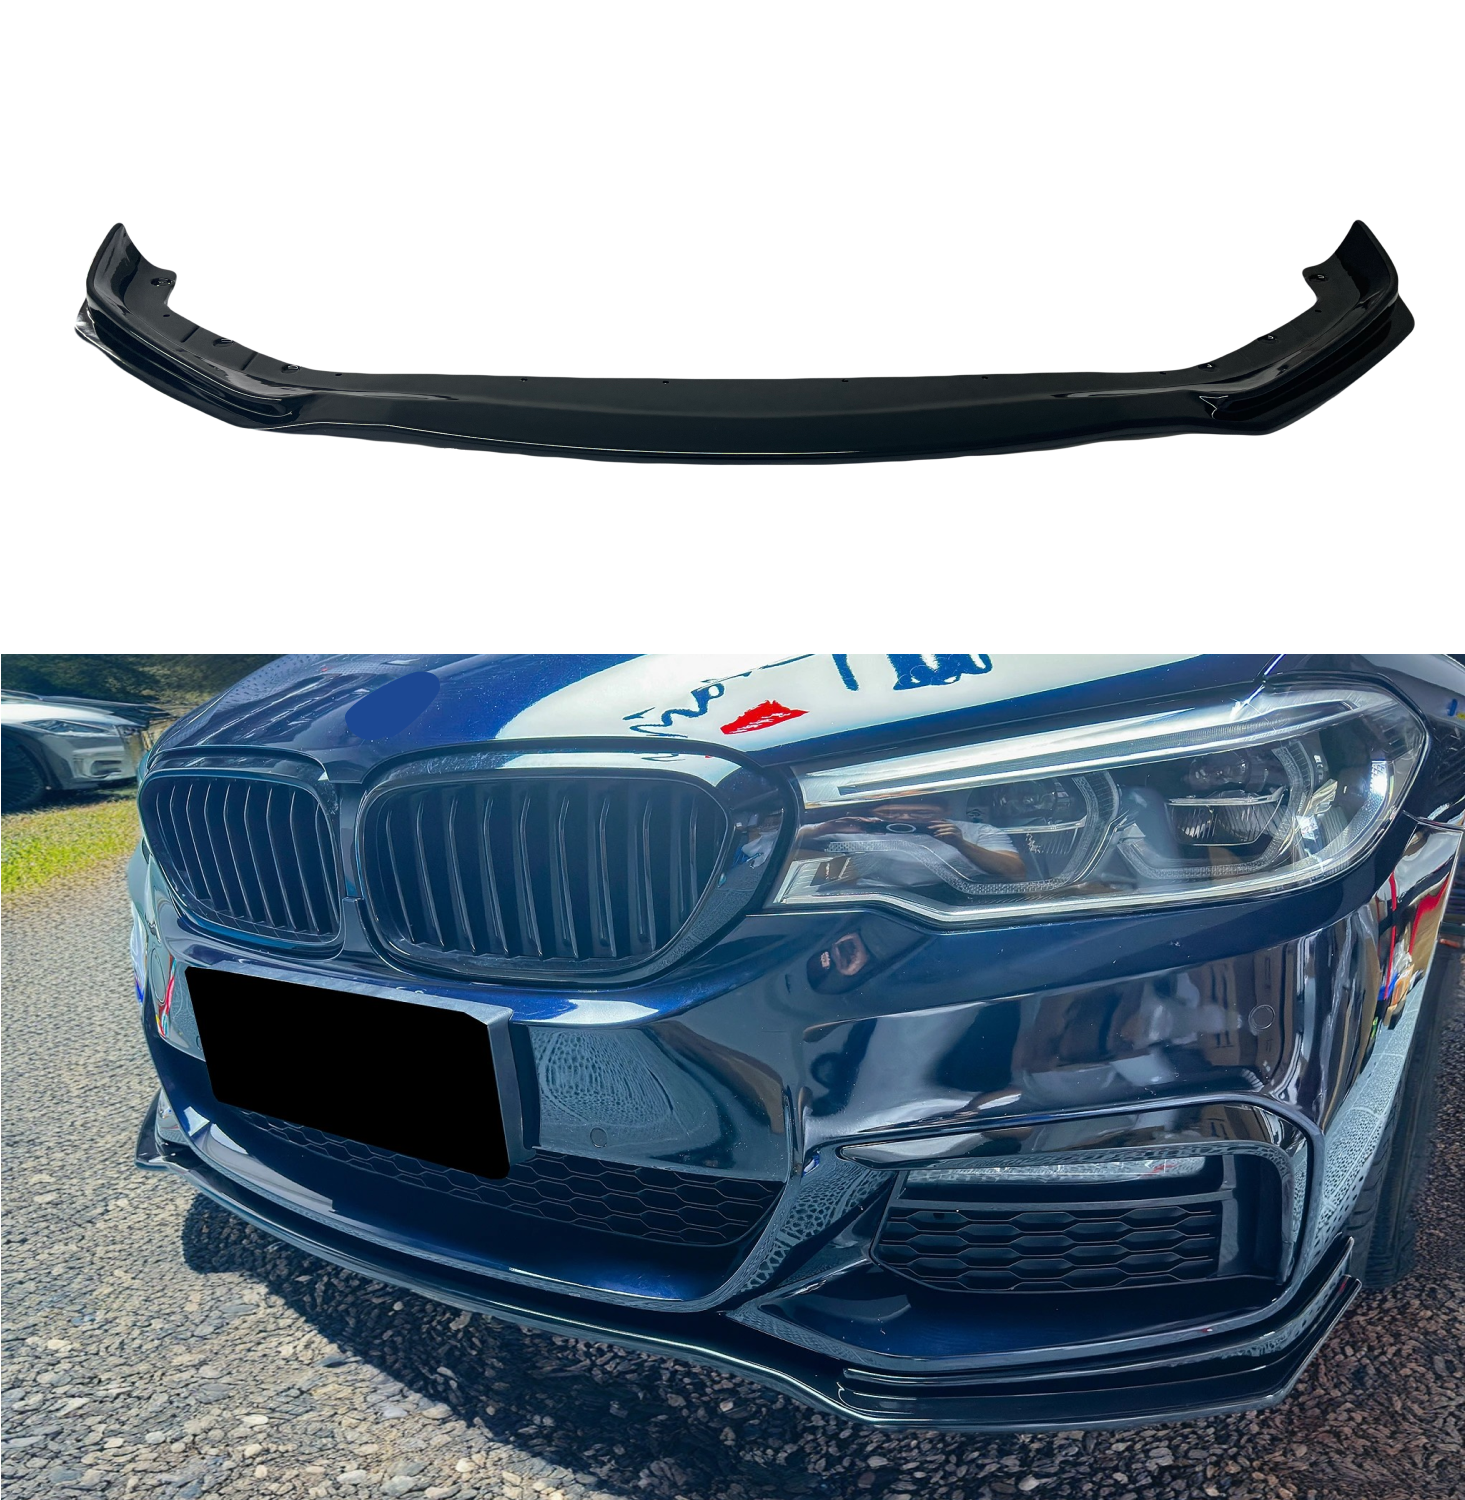 Gloss Black Front Bumper Lip Spoiler on Fit 2017-2020 BMW 5 Series G30 LCI M Sport, showcasing the front spoiler lip splitter for a refined, sporty look.